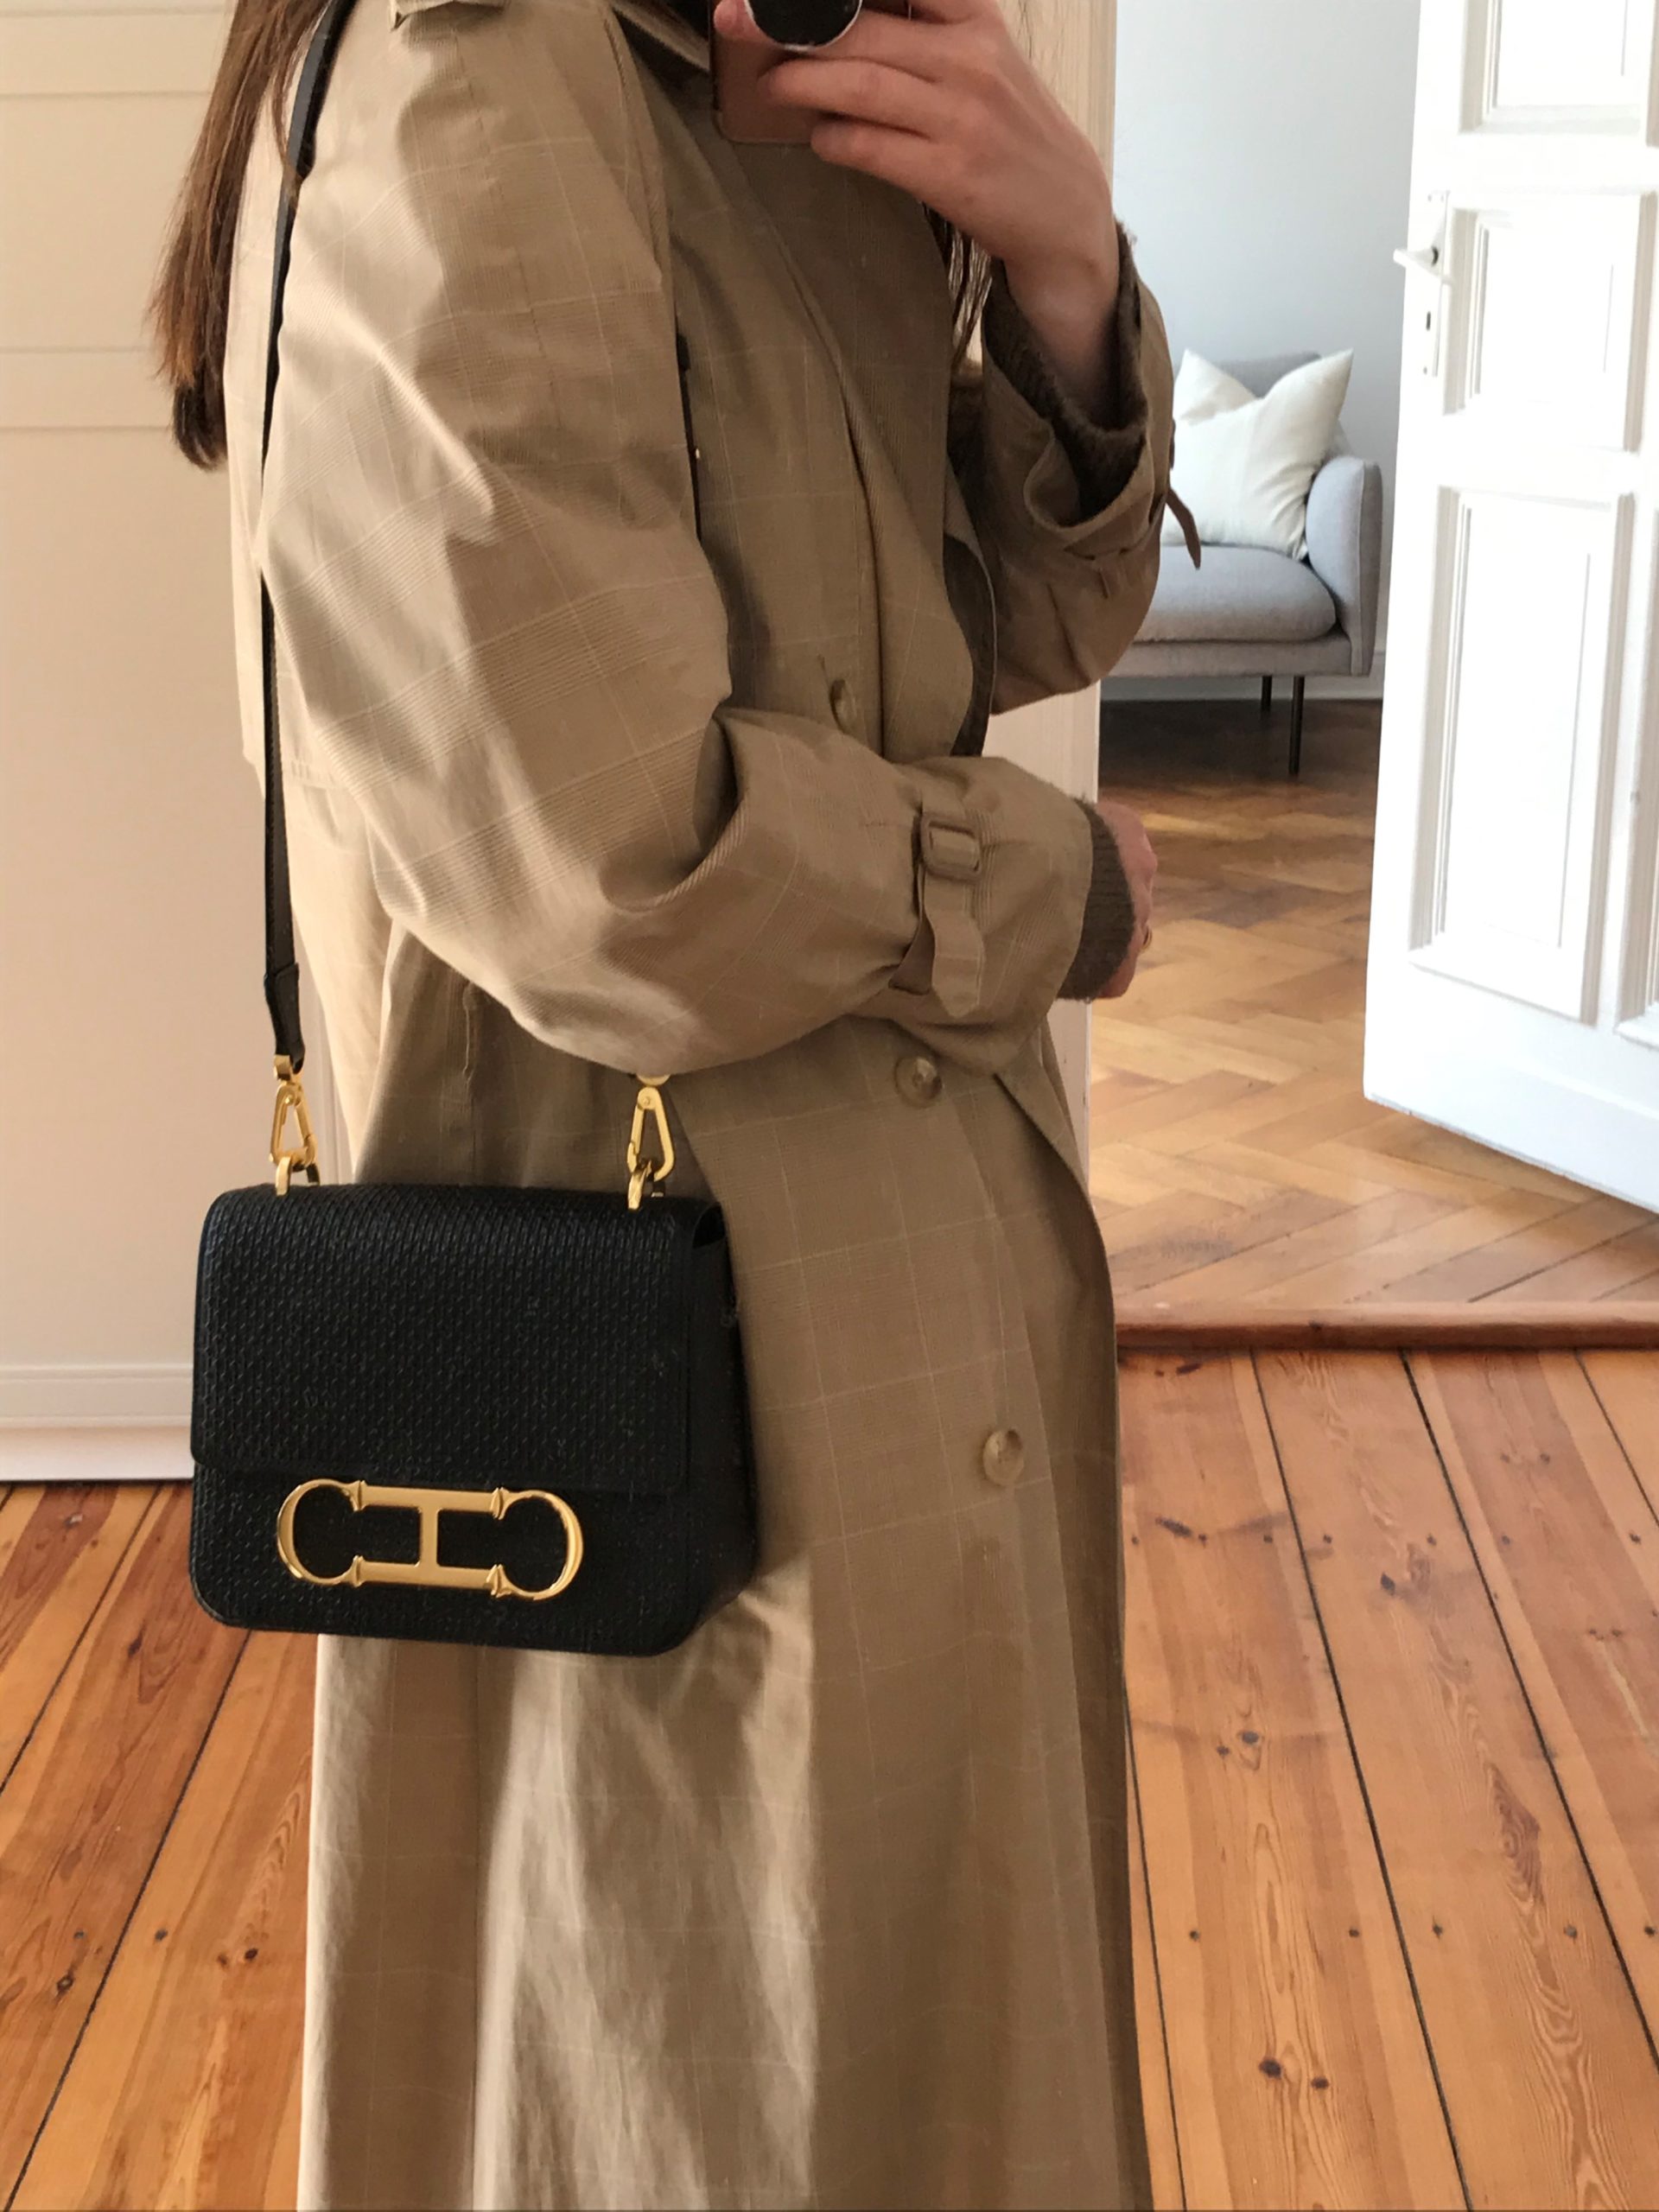 carolina-herrera-black-gold-insignia-bag-fashion-style-outfit-beige-aesthetic-outfit-rg-daily-blog  — RG Daily